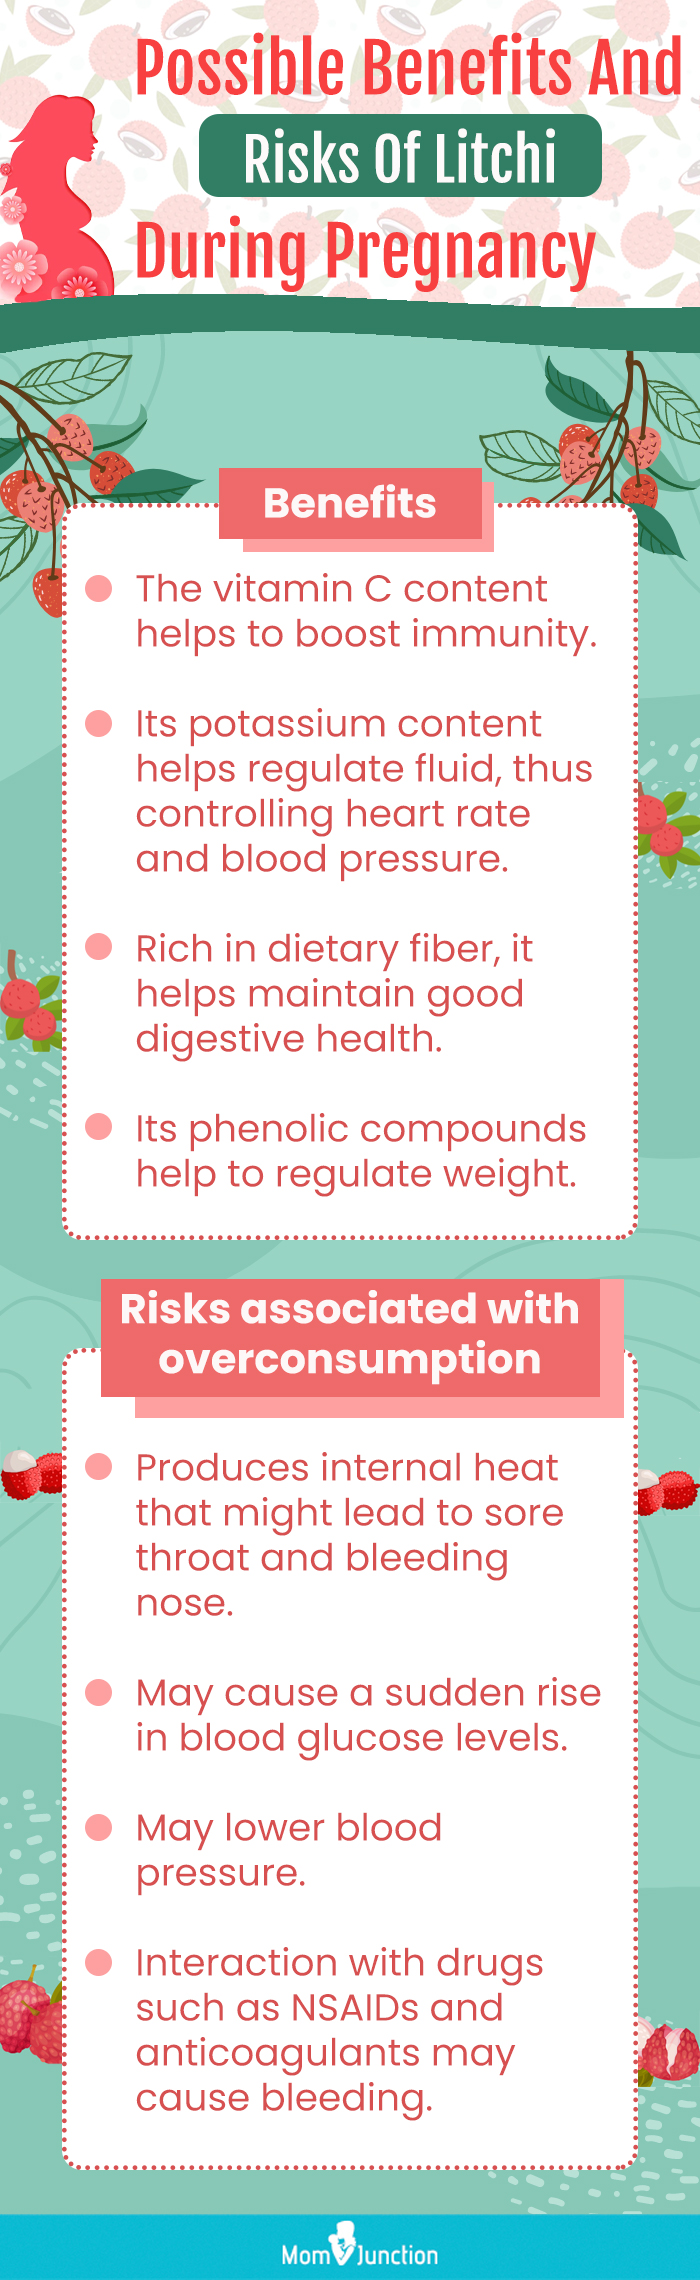 possible benefits and risks of litchi during pregnancy [infographic]